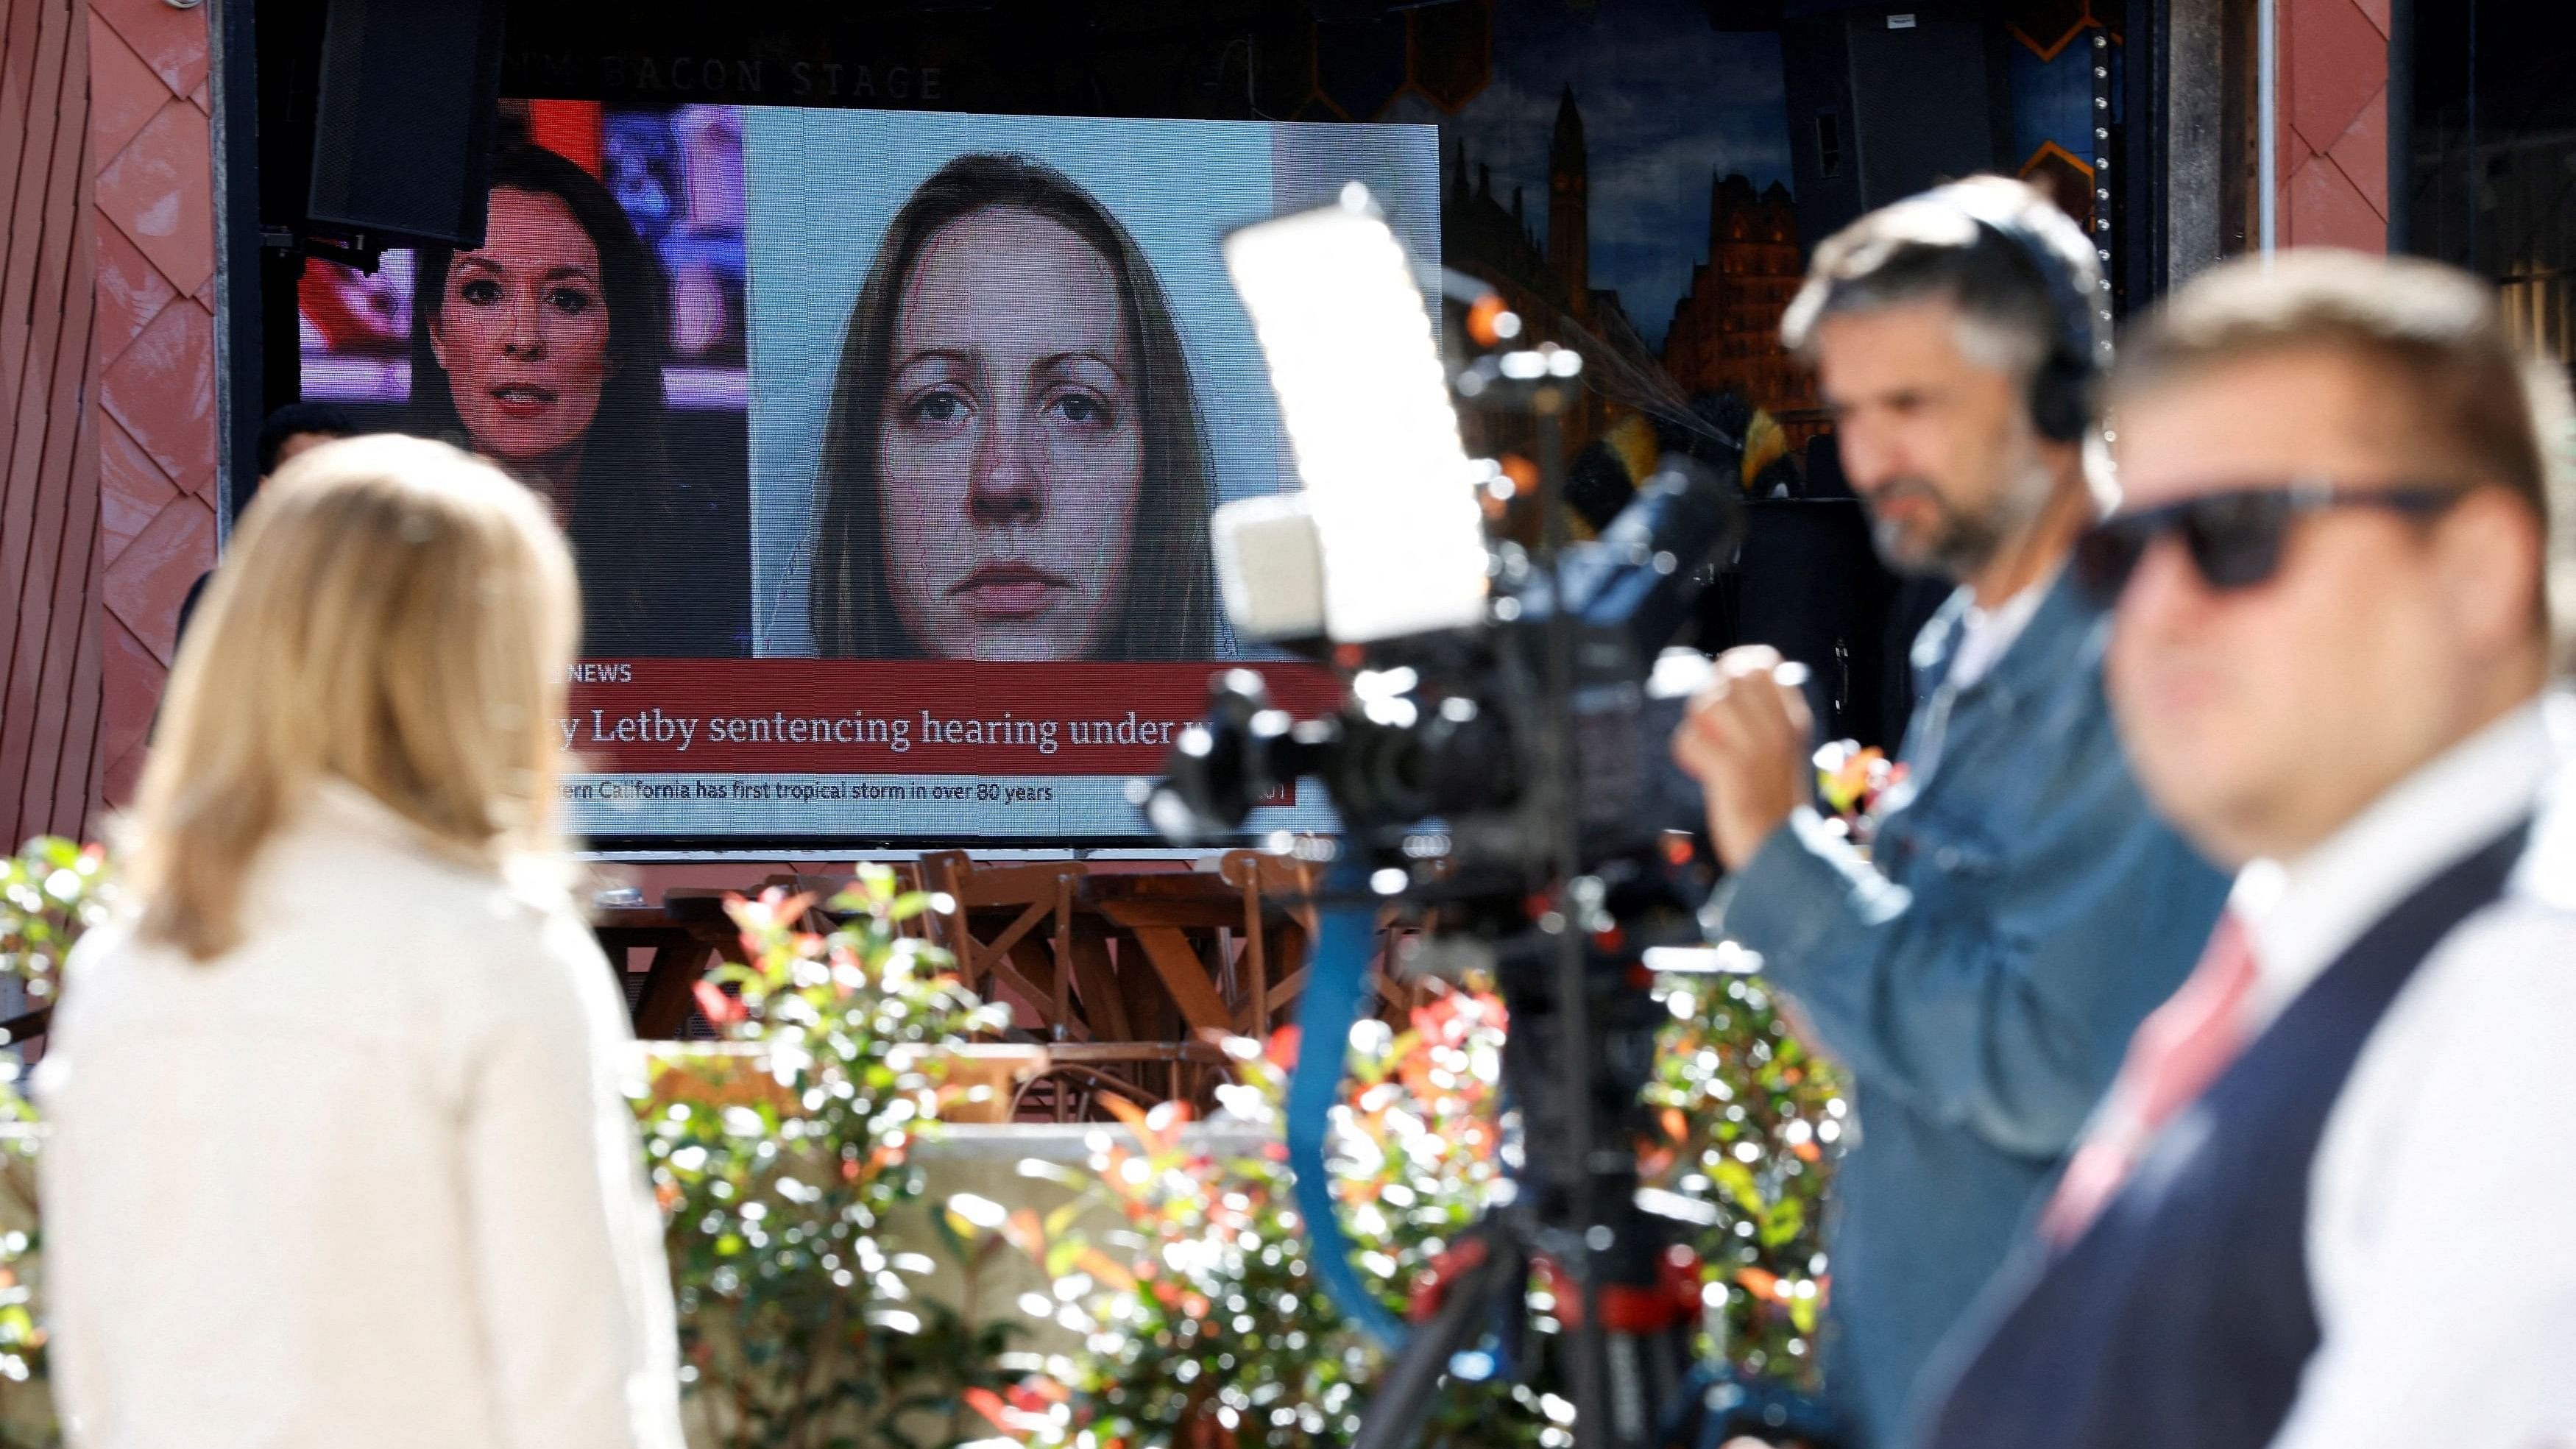 <div class="paragraphs"><p> Members of the media work near a large screen showing a picture of convicted hospital nurse Lucy Letby.</p></div>